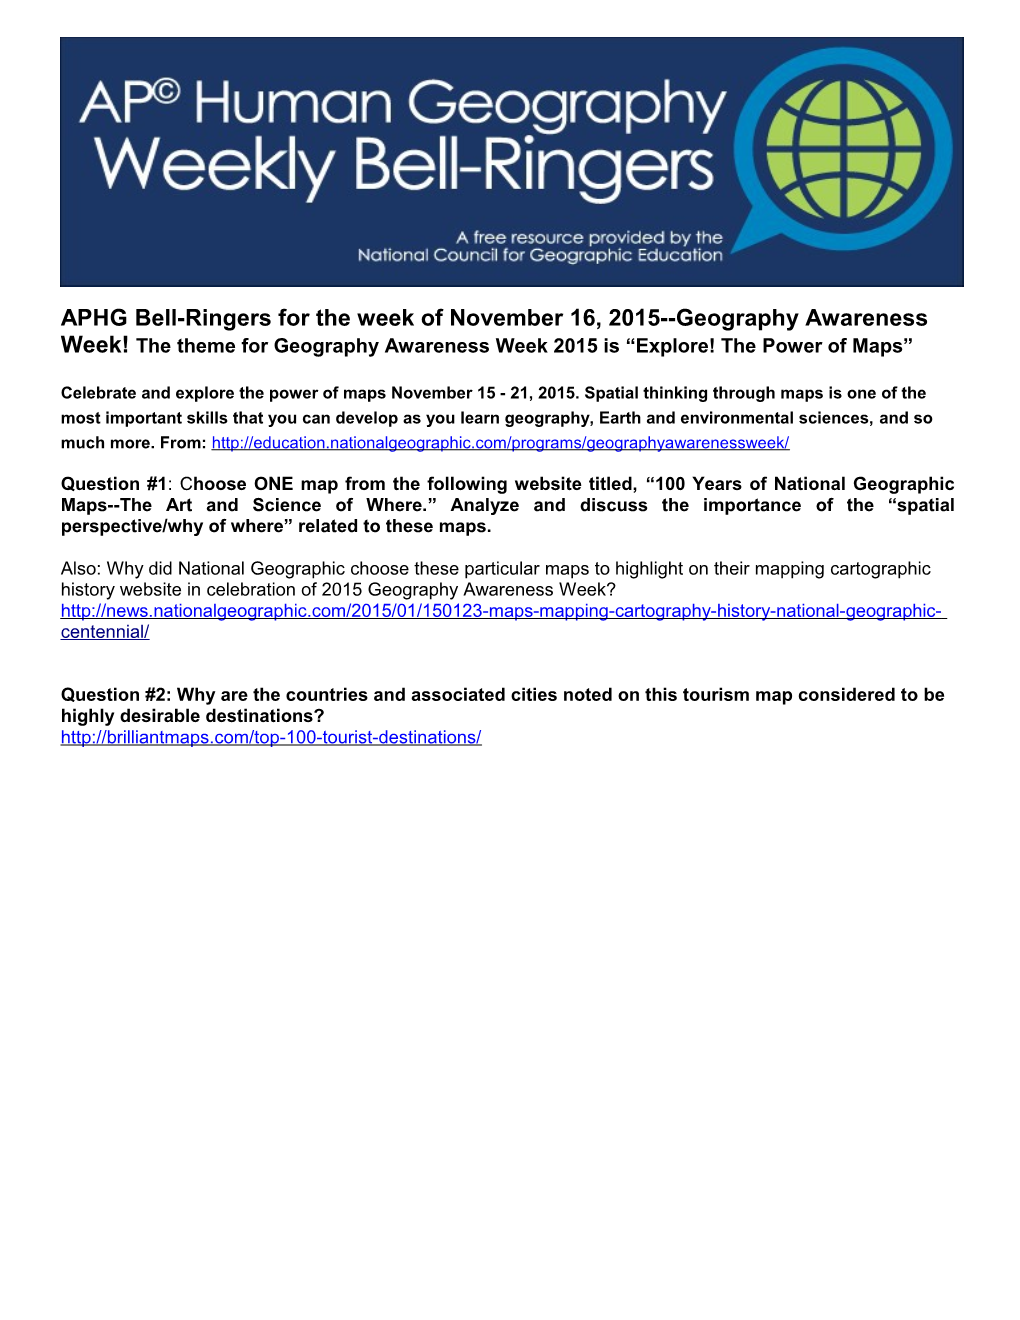 APHG Bell-Ringers for the Week of November 16, 2015 Geography Awareness Week! the Theme